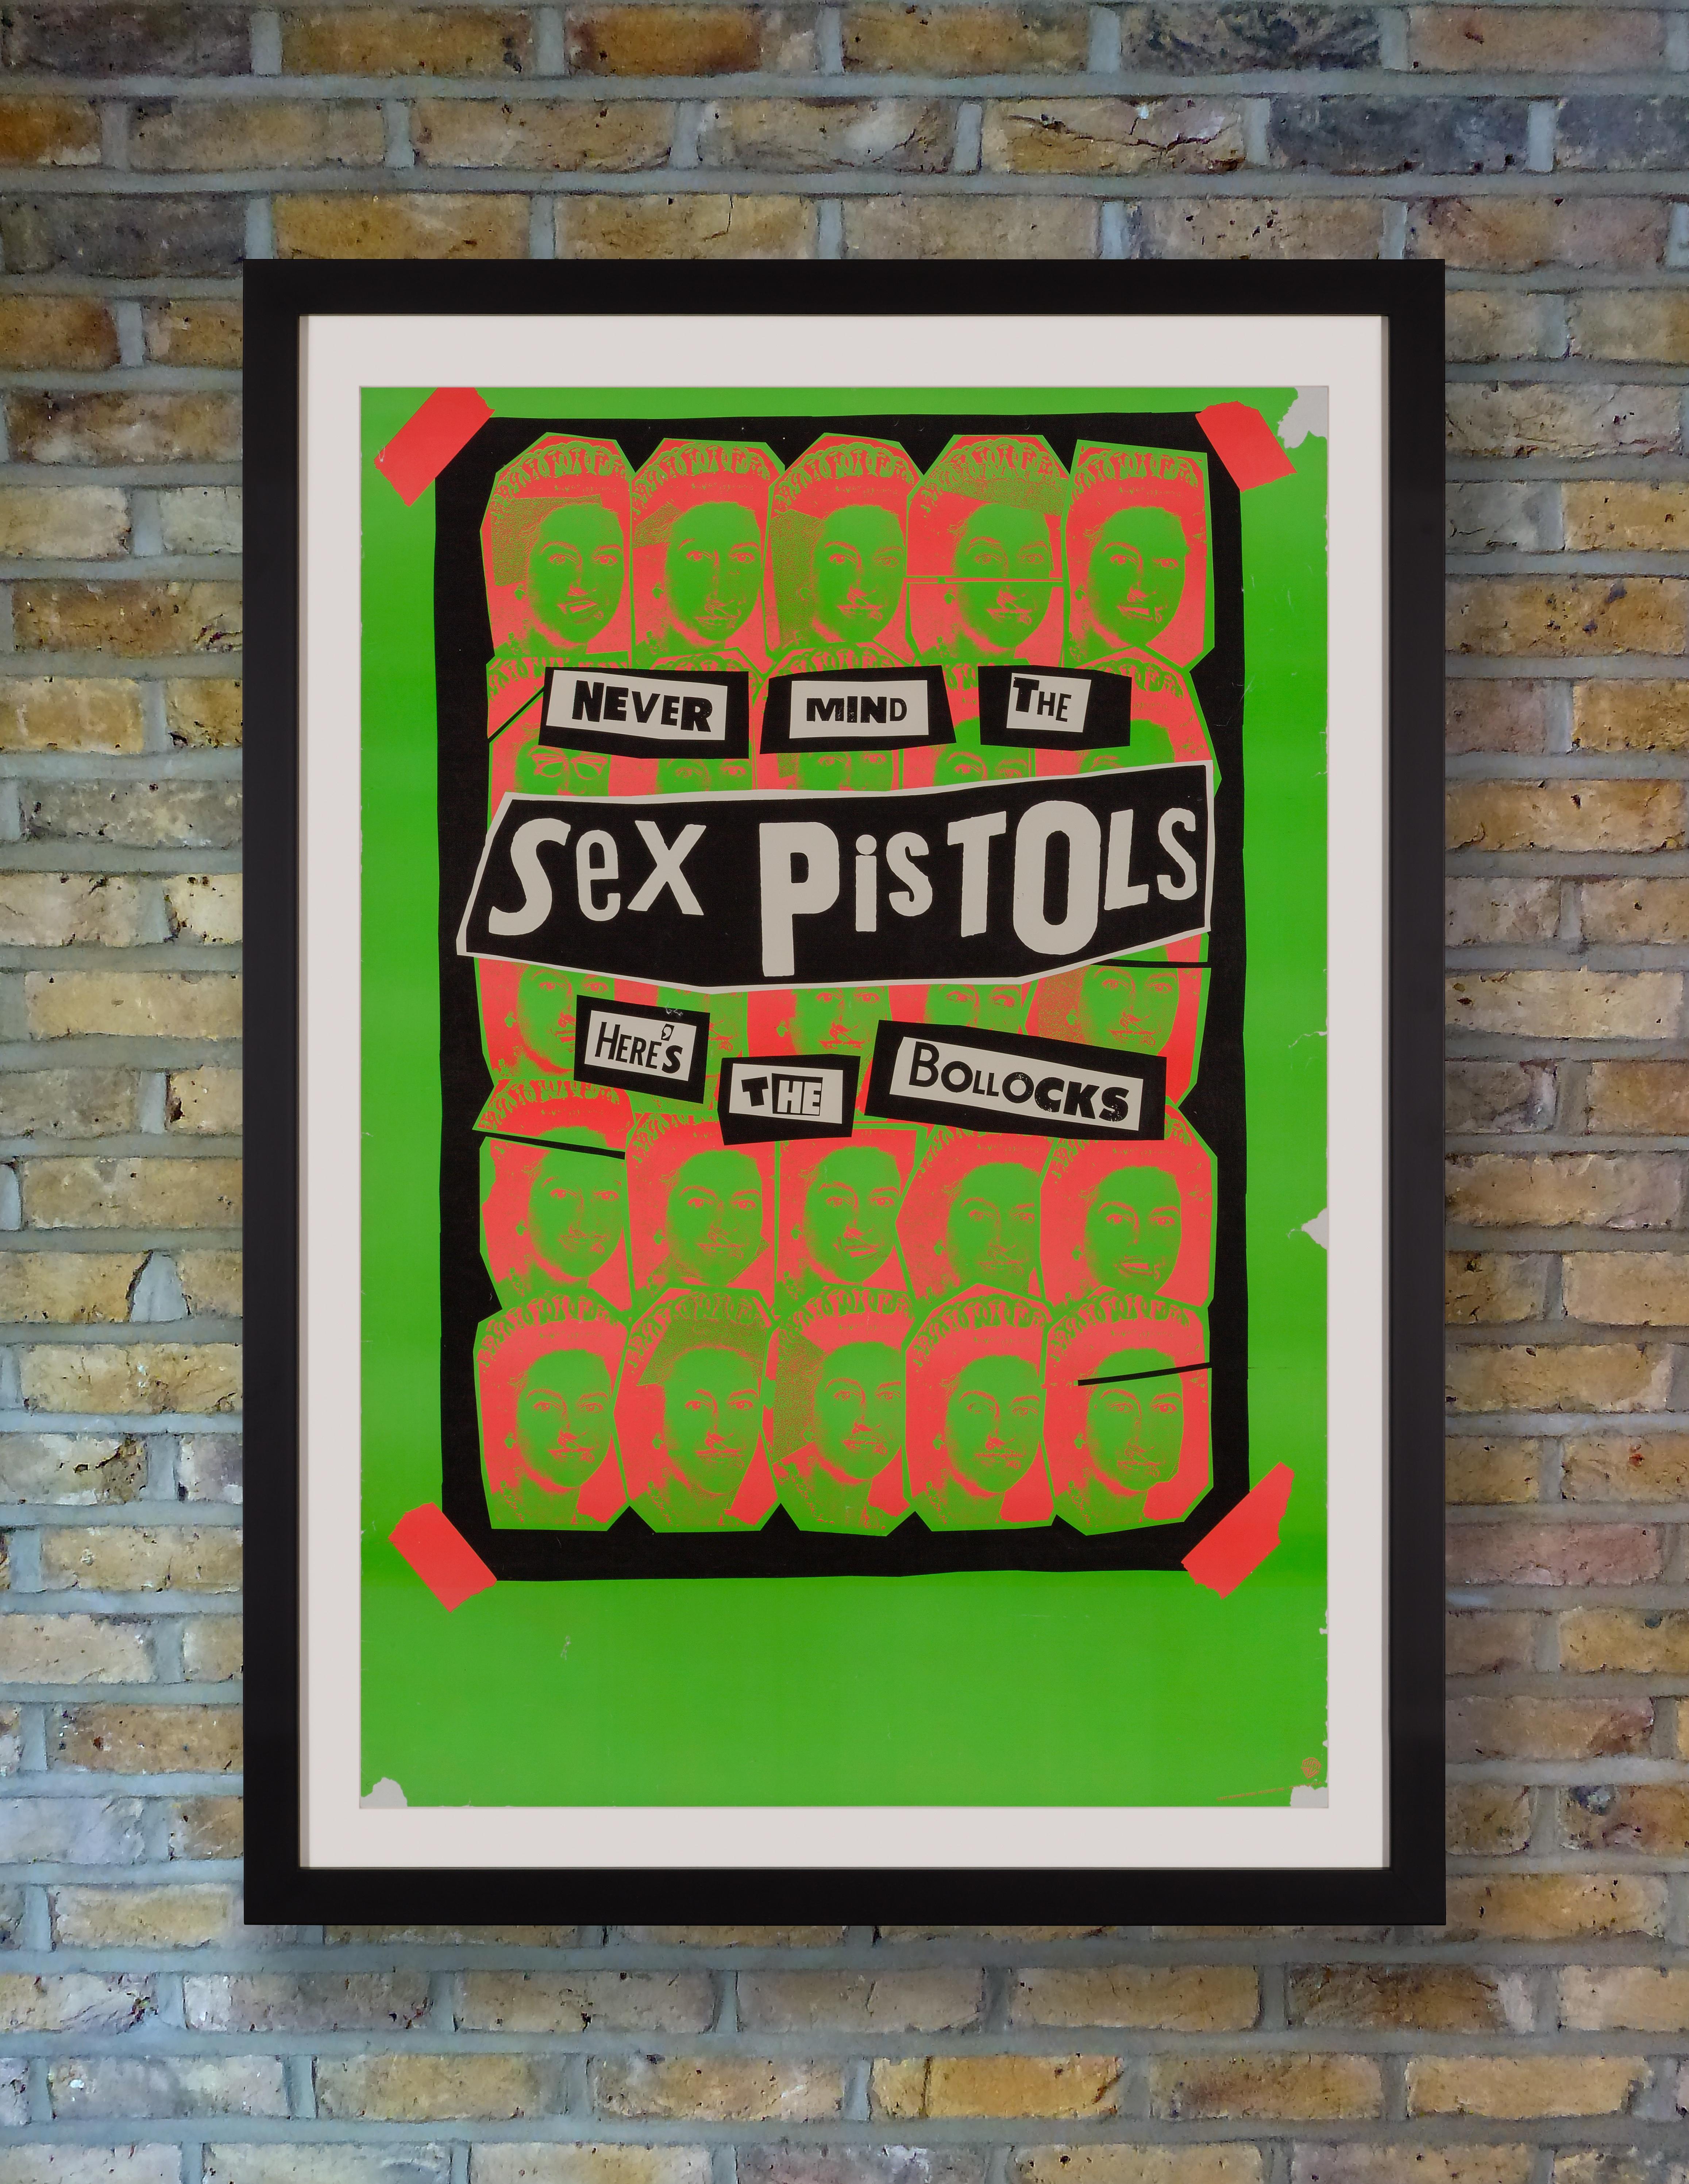 An incredibly rare Warner Bros promotional poster for the November 1977 U.S. release of the Sex Pistols only studio album 'Never Mind The Bollocks,' featuring a repeat of Jamie Reid's God Save The Queen motif in the dayglo pink and green colors of